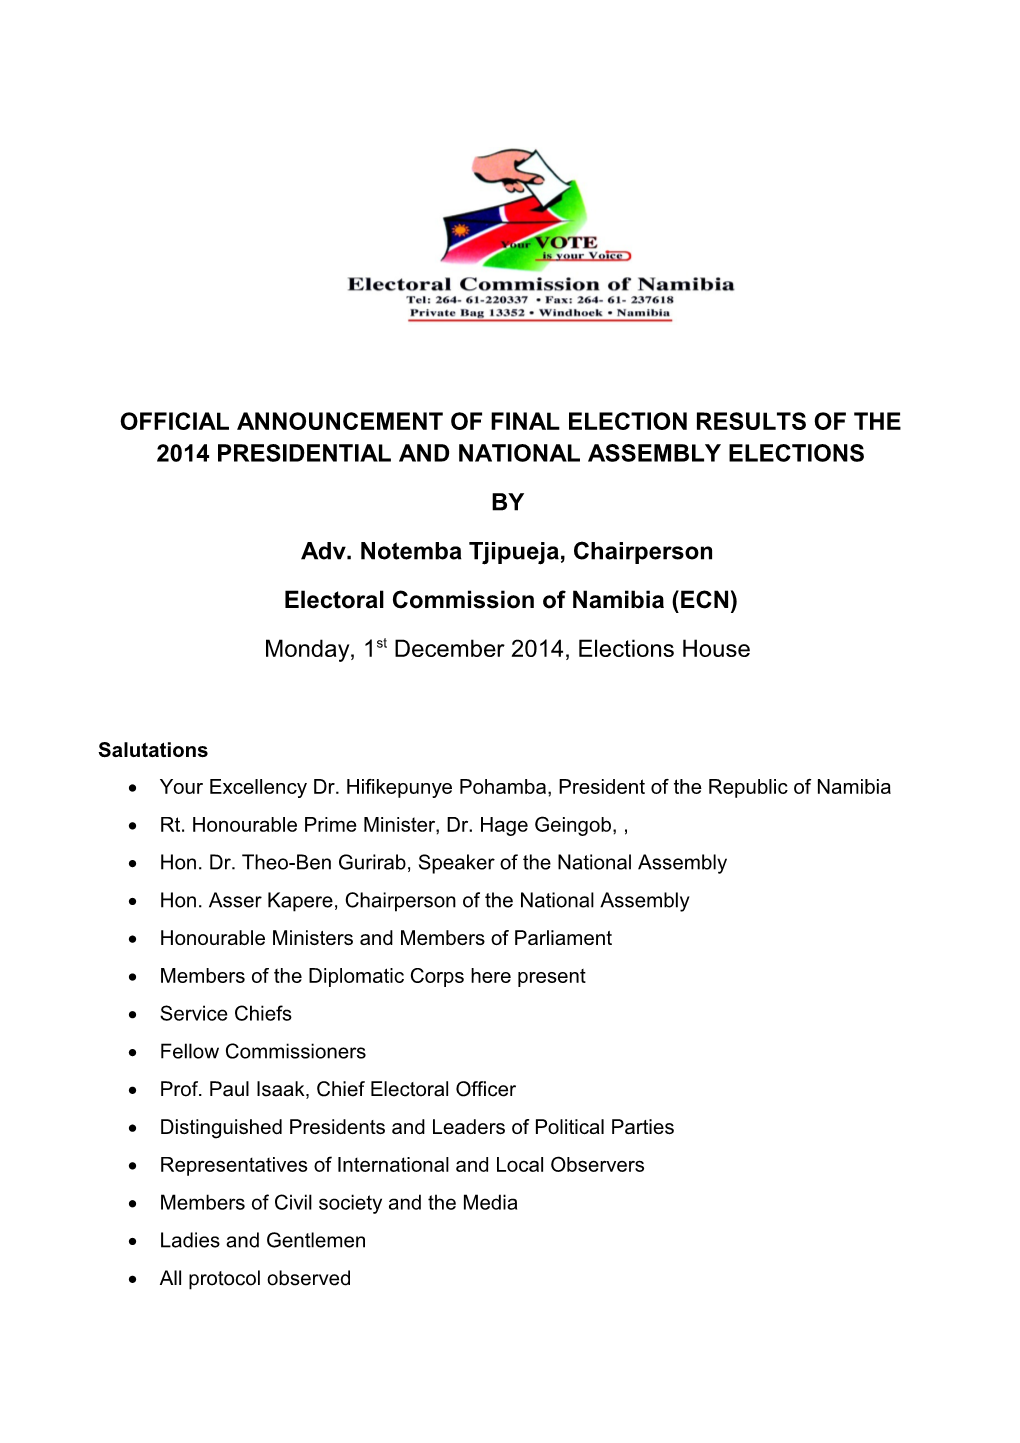 Official Announcement of Final Election Results of the 2014 Presidentialand National Assembly